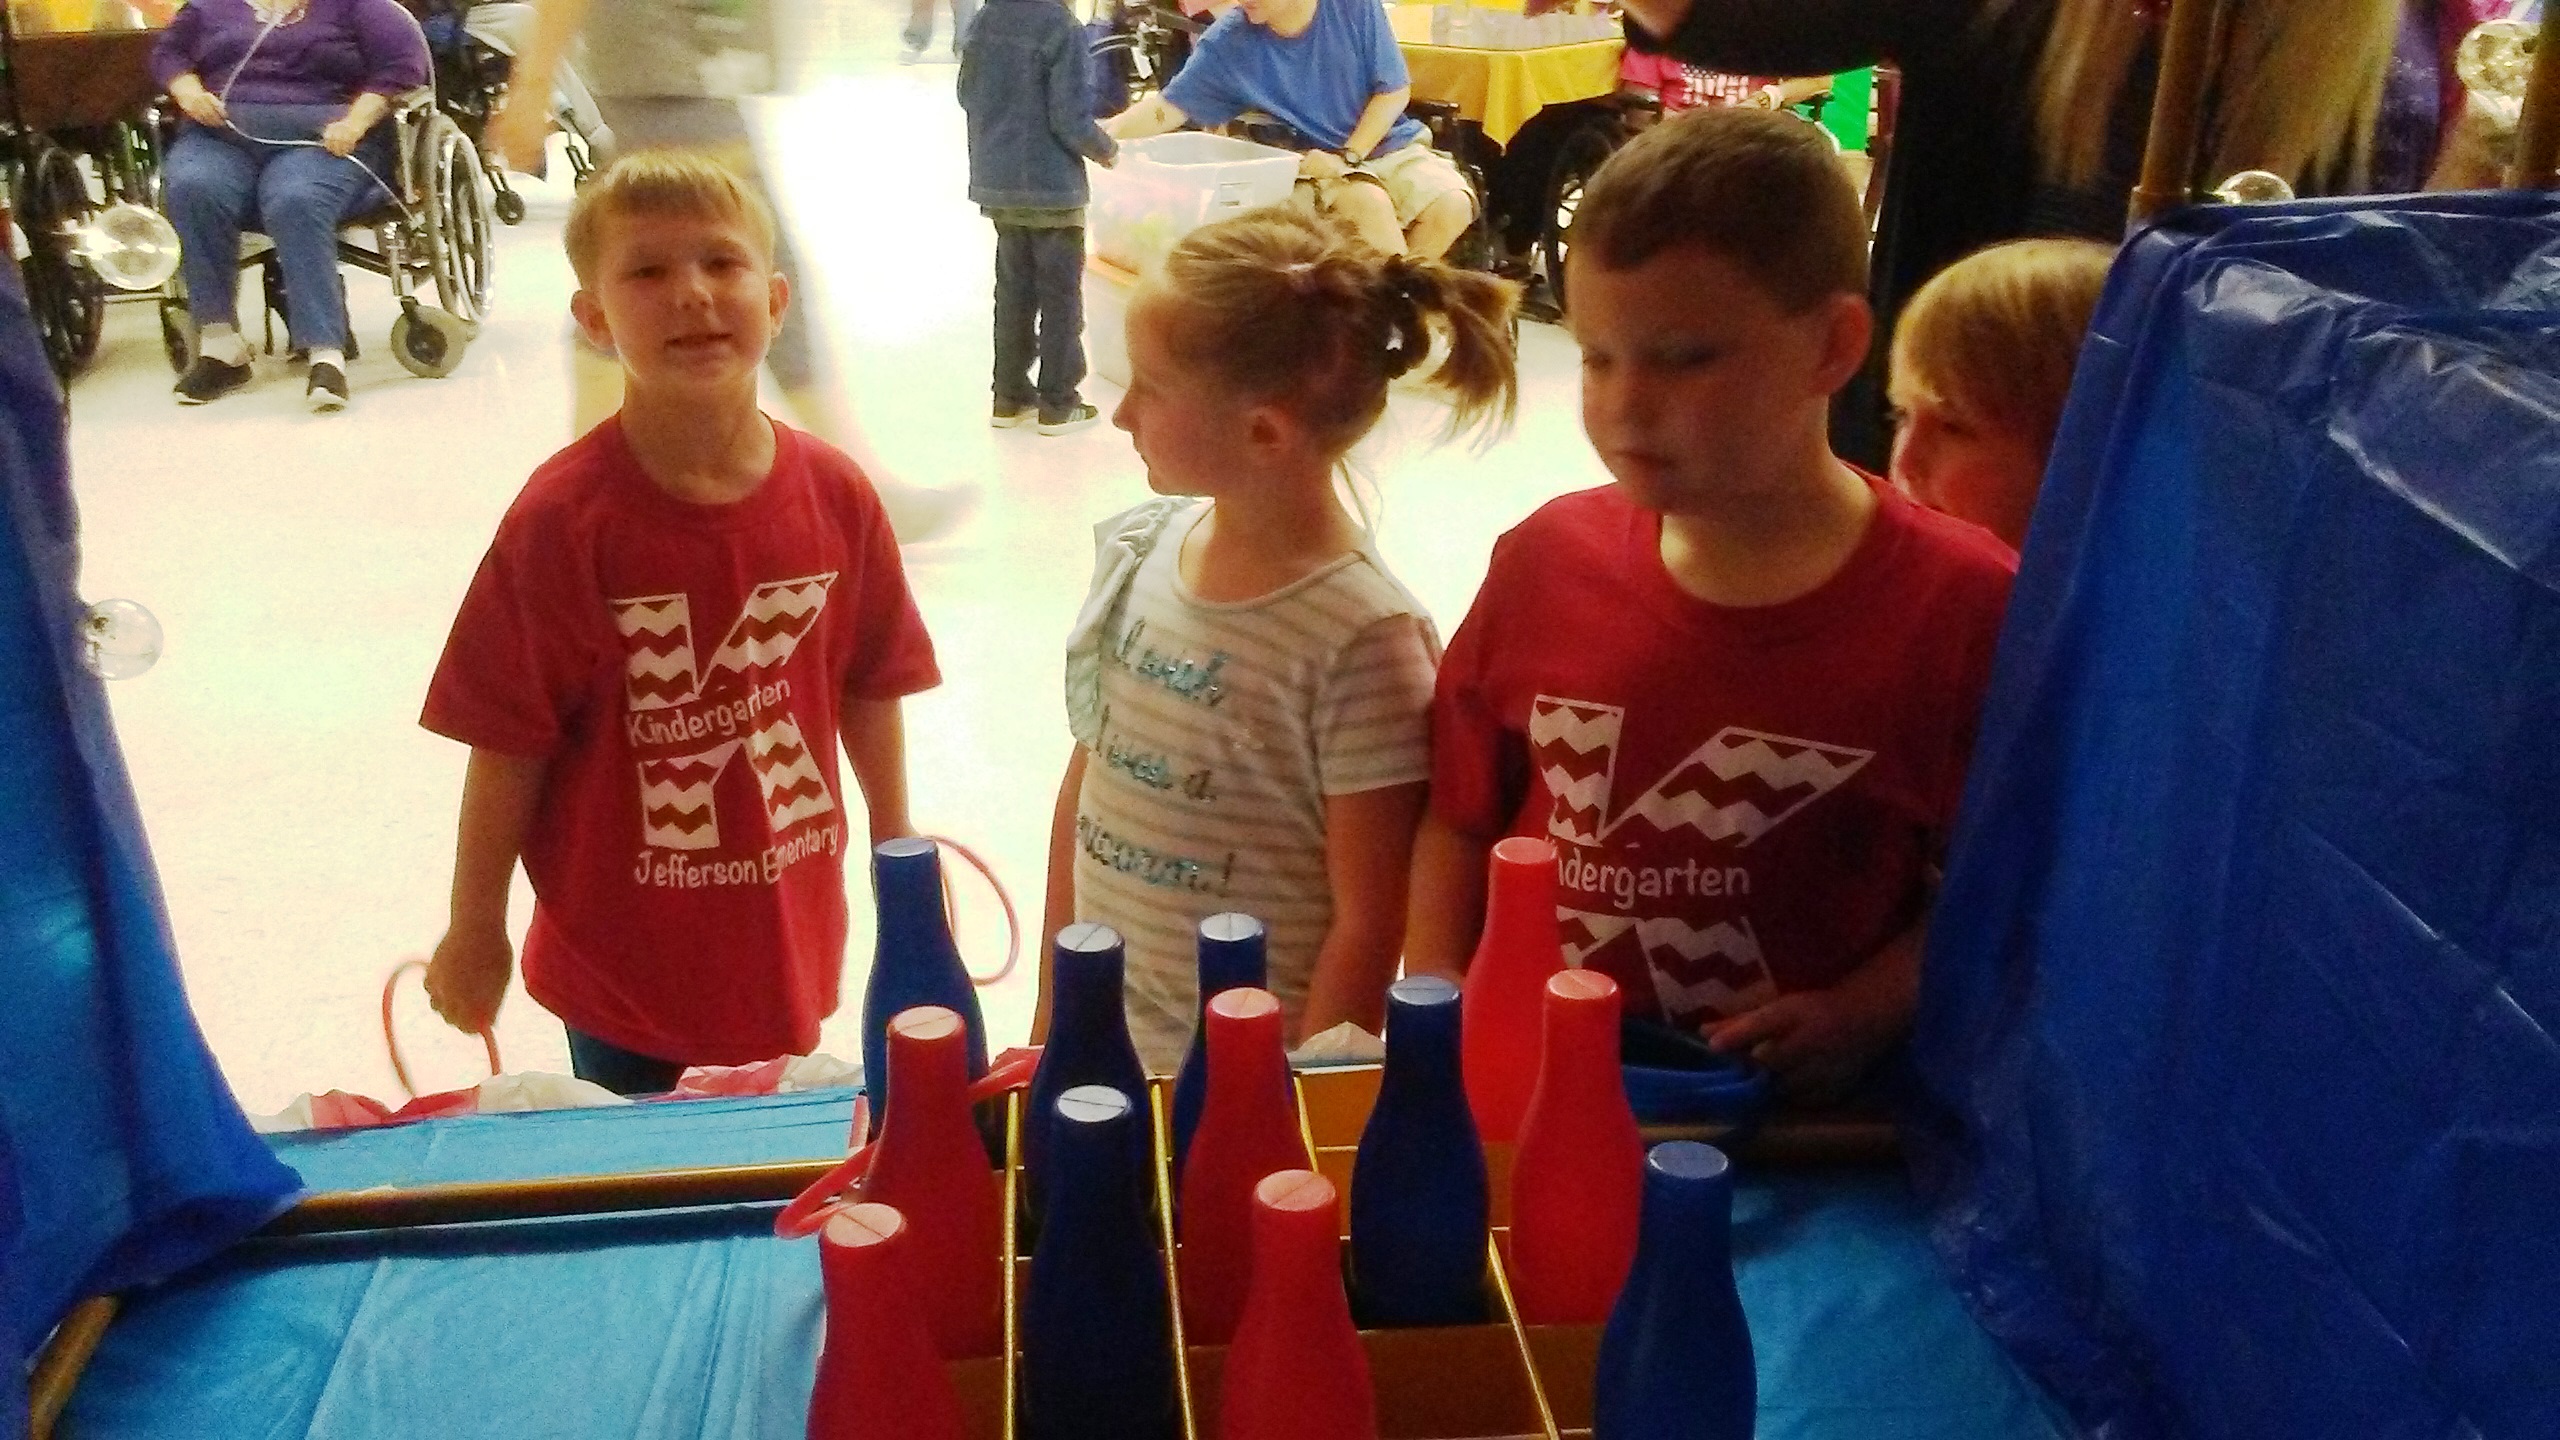 Kindergarten students playing at the ring toss in the carnival